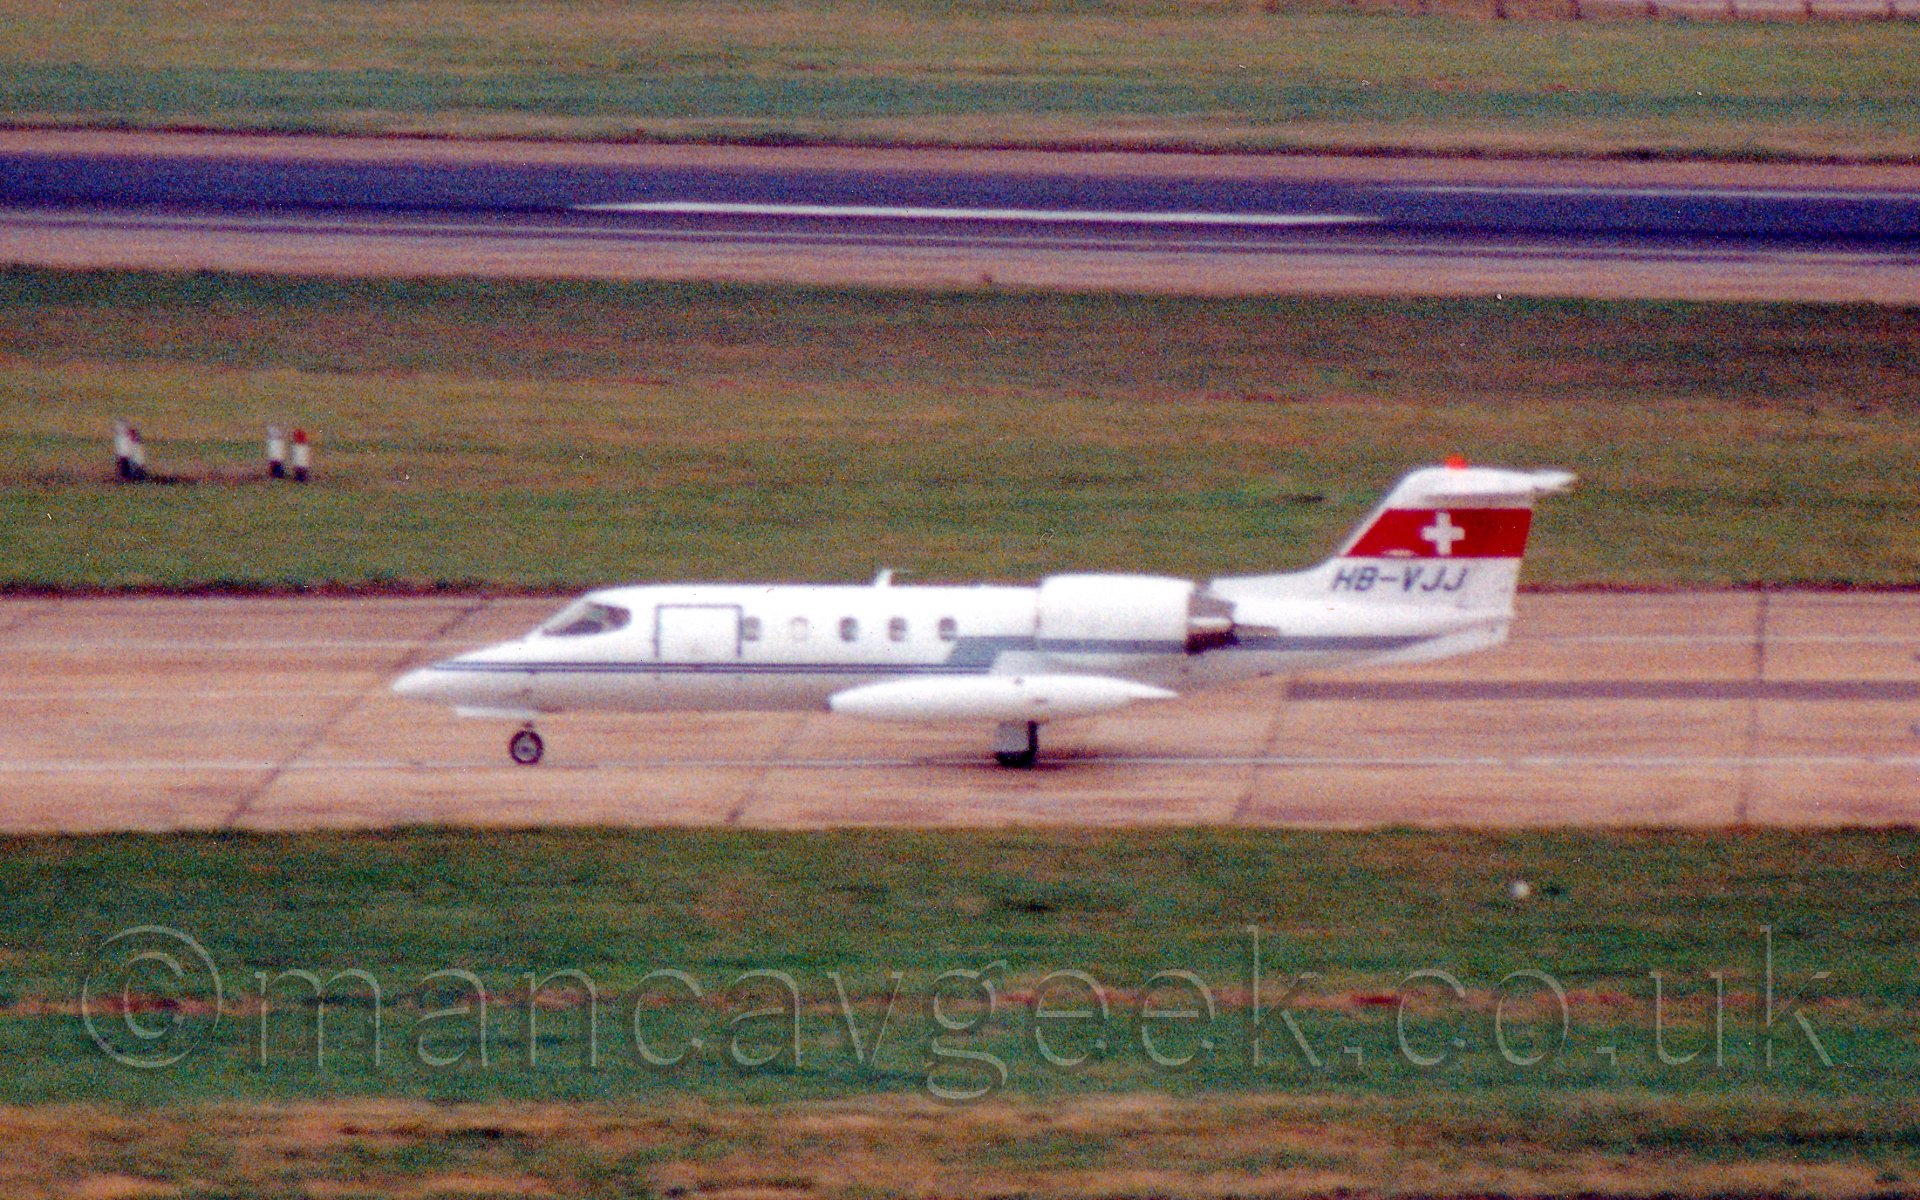 Side view of a twin engined bizjet taxiing from right to left. The planes body is mostly white with a blue line running from nose to tail, rising slightly over the wing to also cross the engines. There is a thick red stripe 2/3rds of the way up the tail with a white cross in the middle. The background